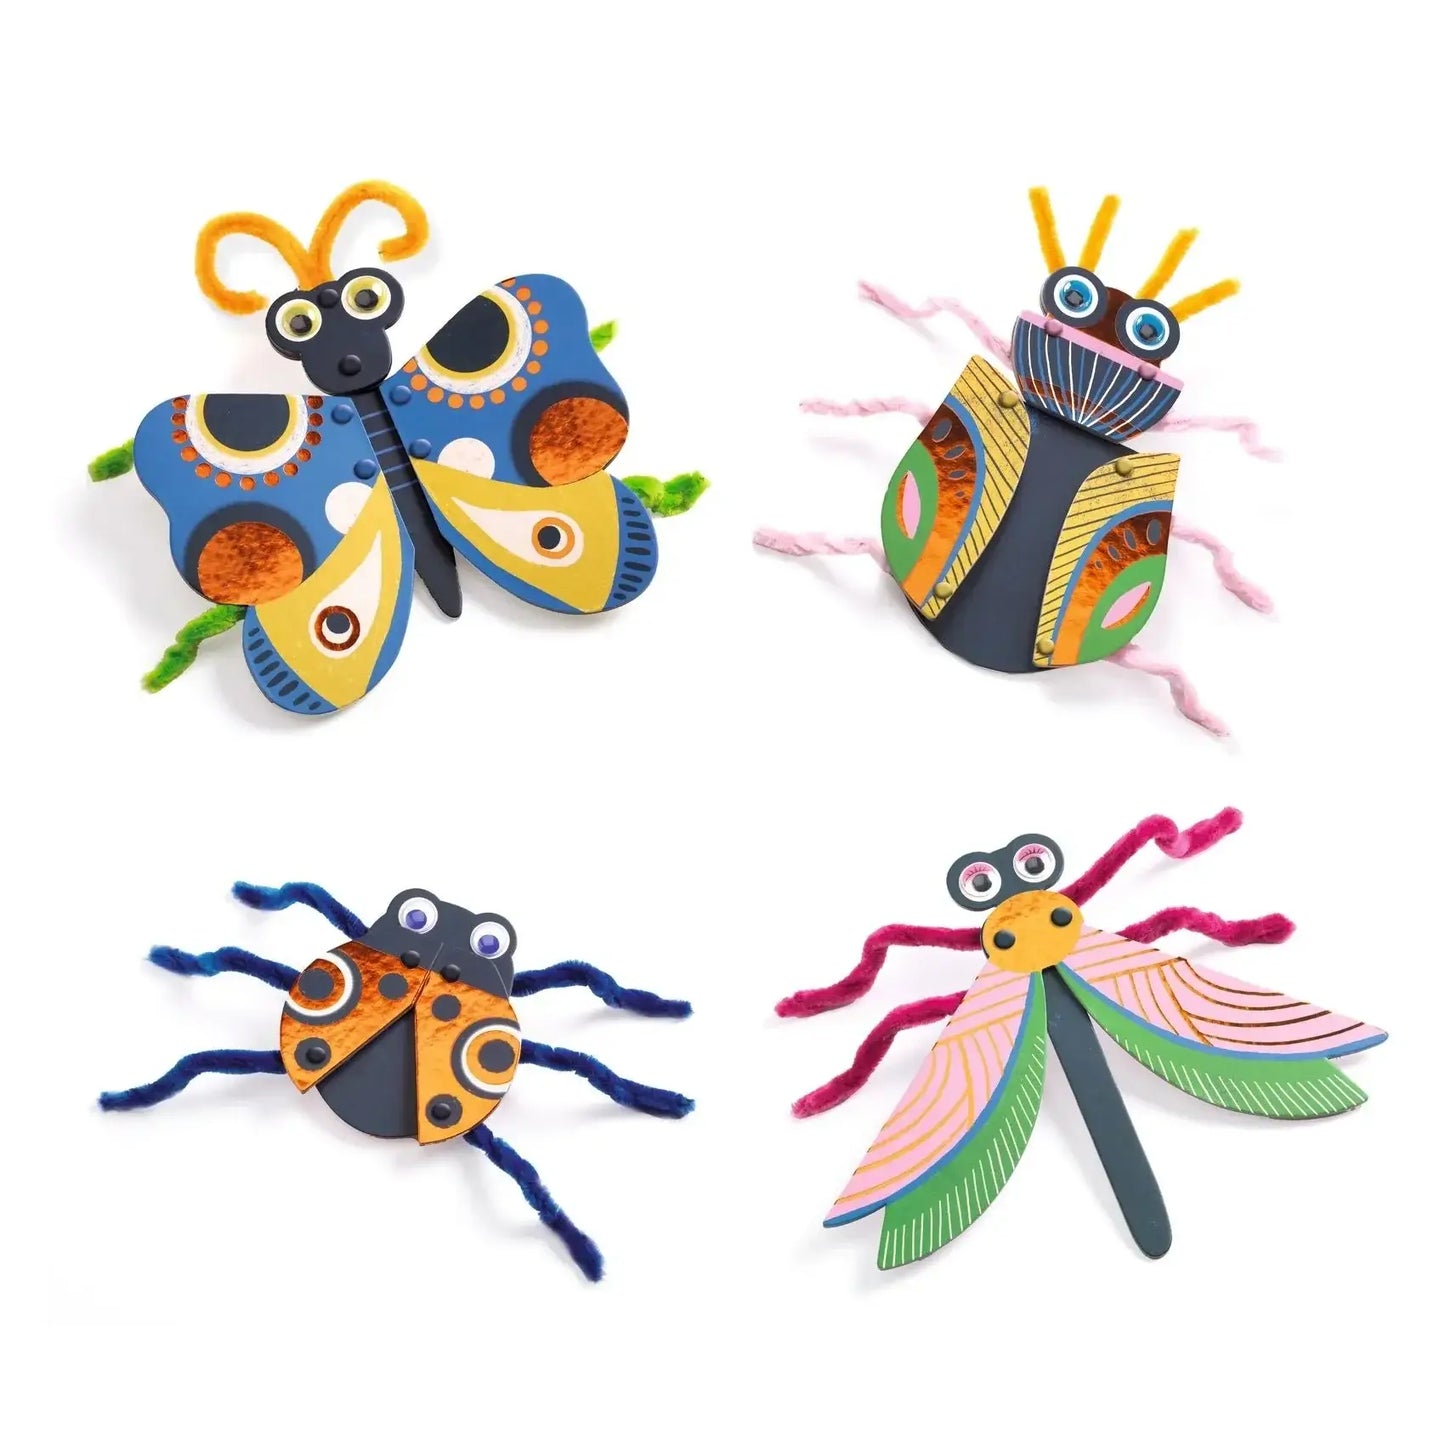 Fuzzy Bugs 3D Collage Arts & Crafts Kit for ages 3 to 6